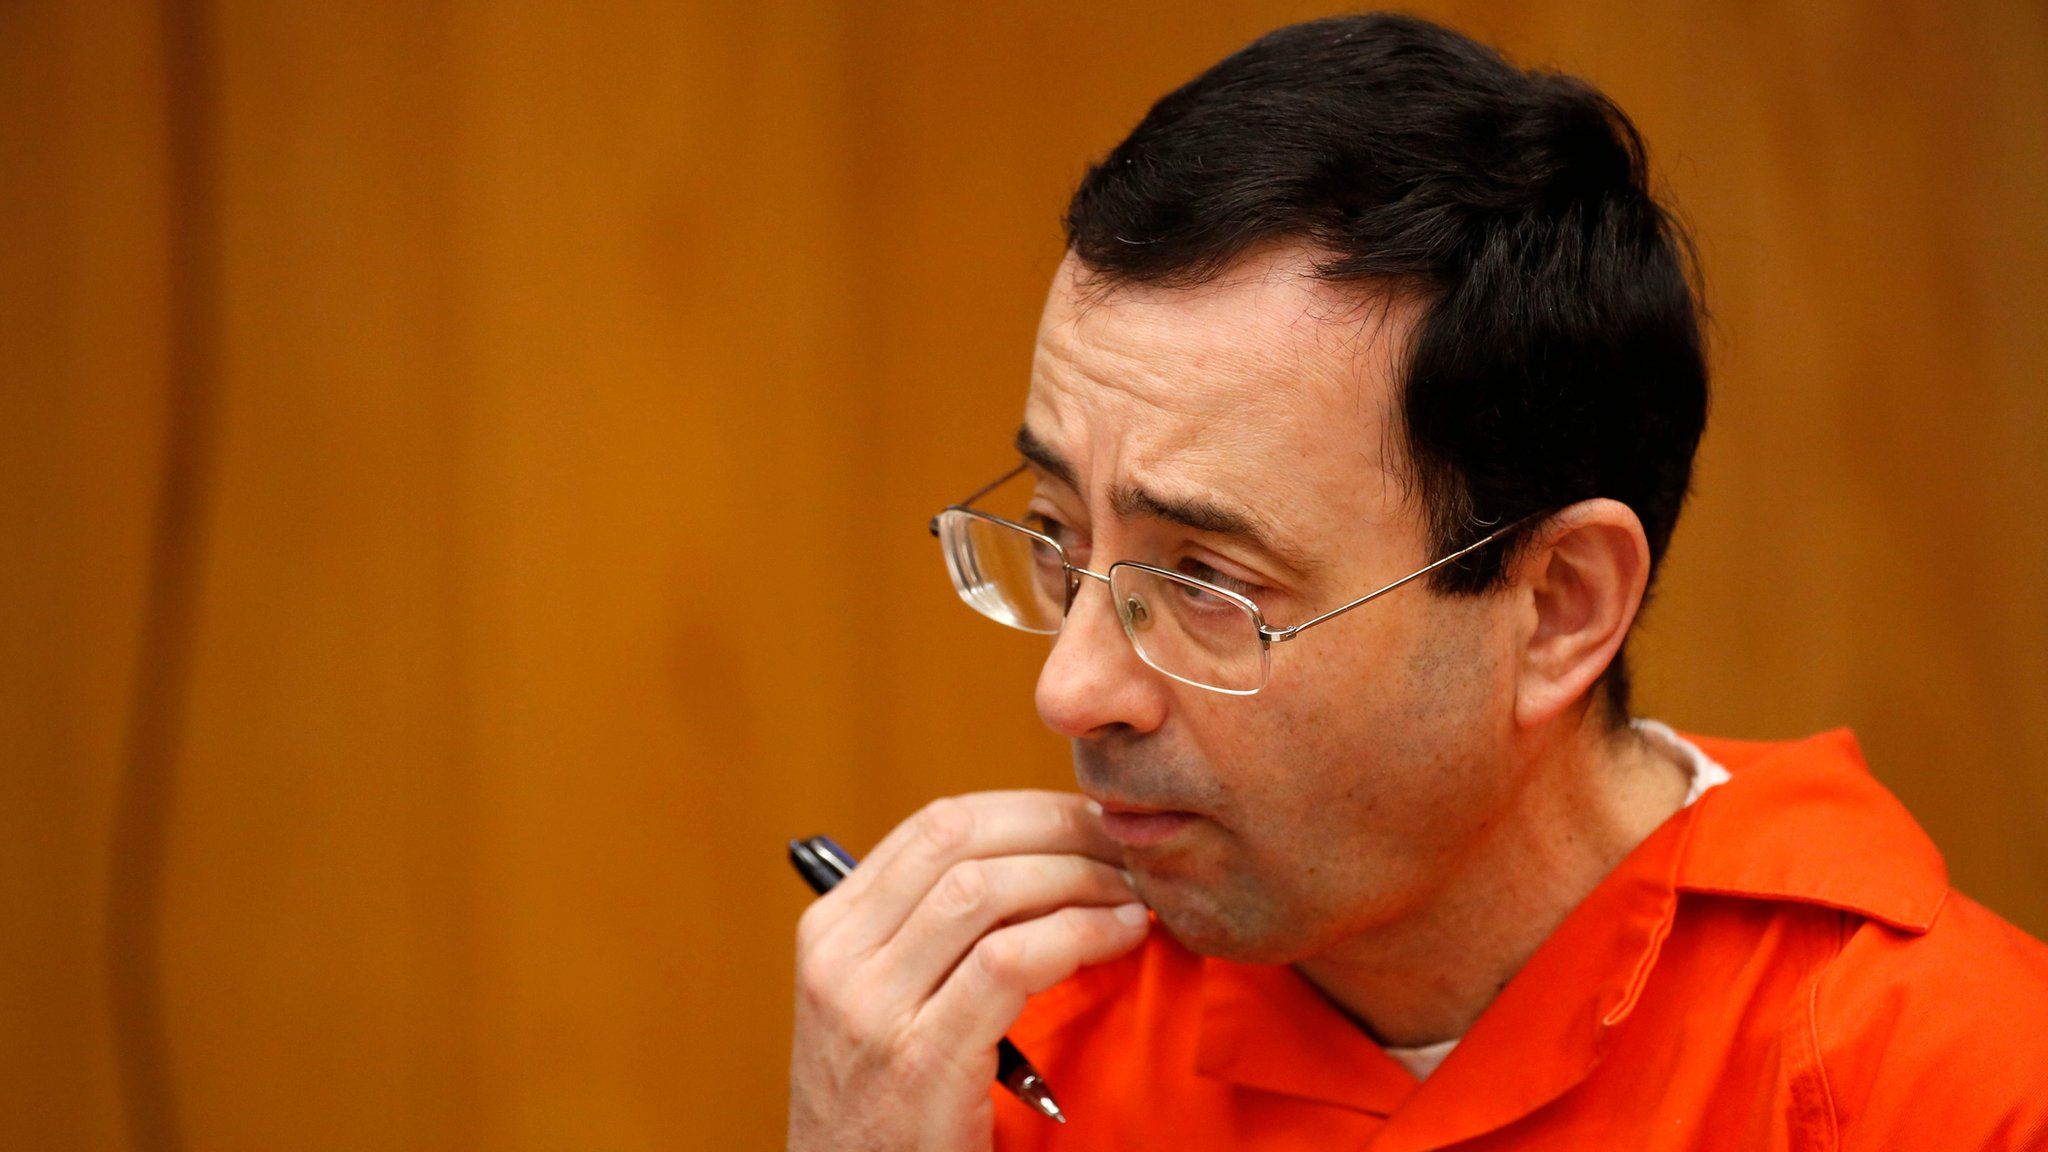 Larry Nassar in Eaton, County Circuit Court on 31 January 2018 in Charlotte, Michigan